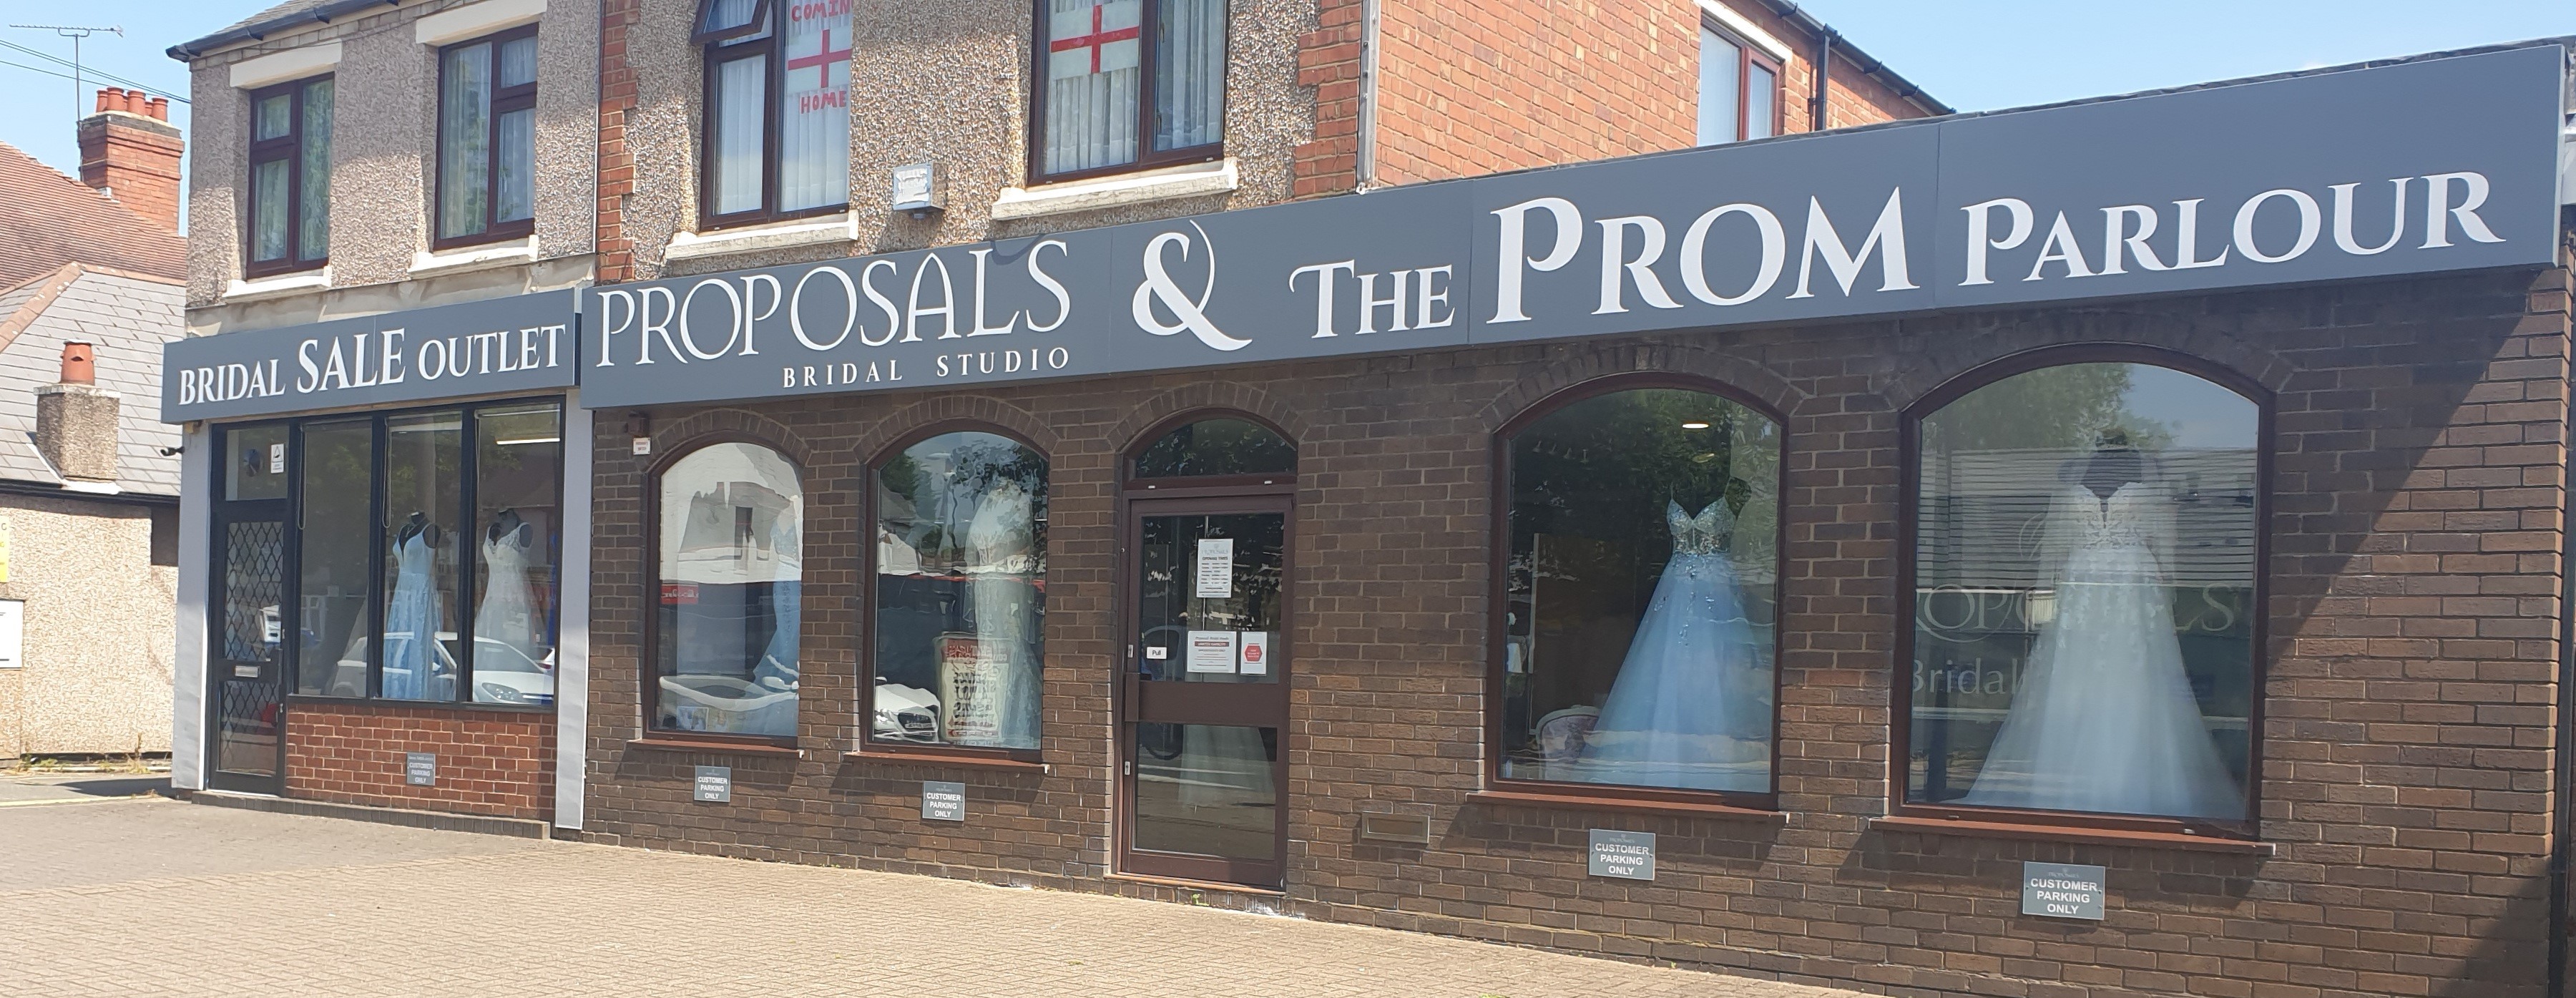 Proposals and Prom Parlour